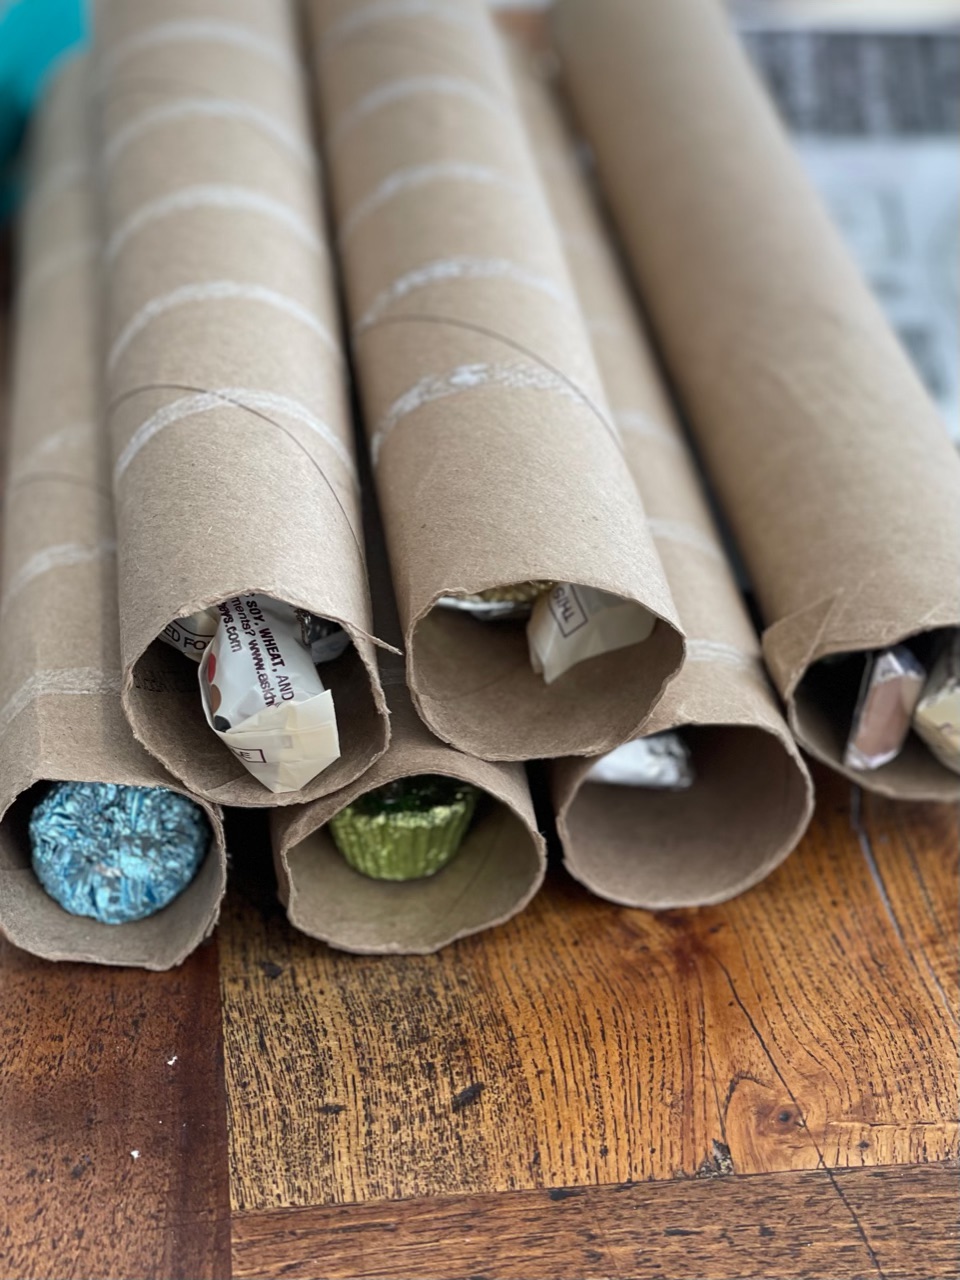 Day 8. Earth Day - Paper Towel Rolls- Save Them! - The Daily Marker